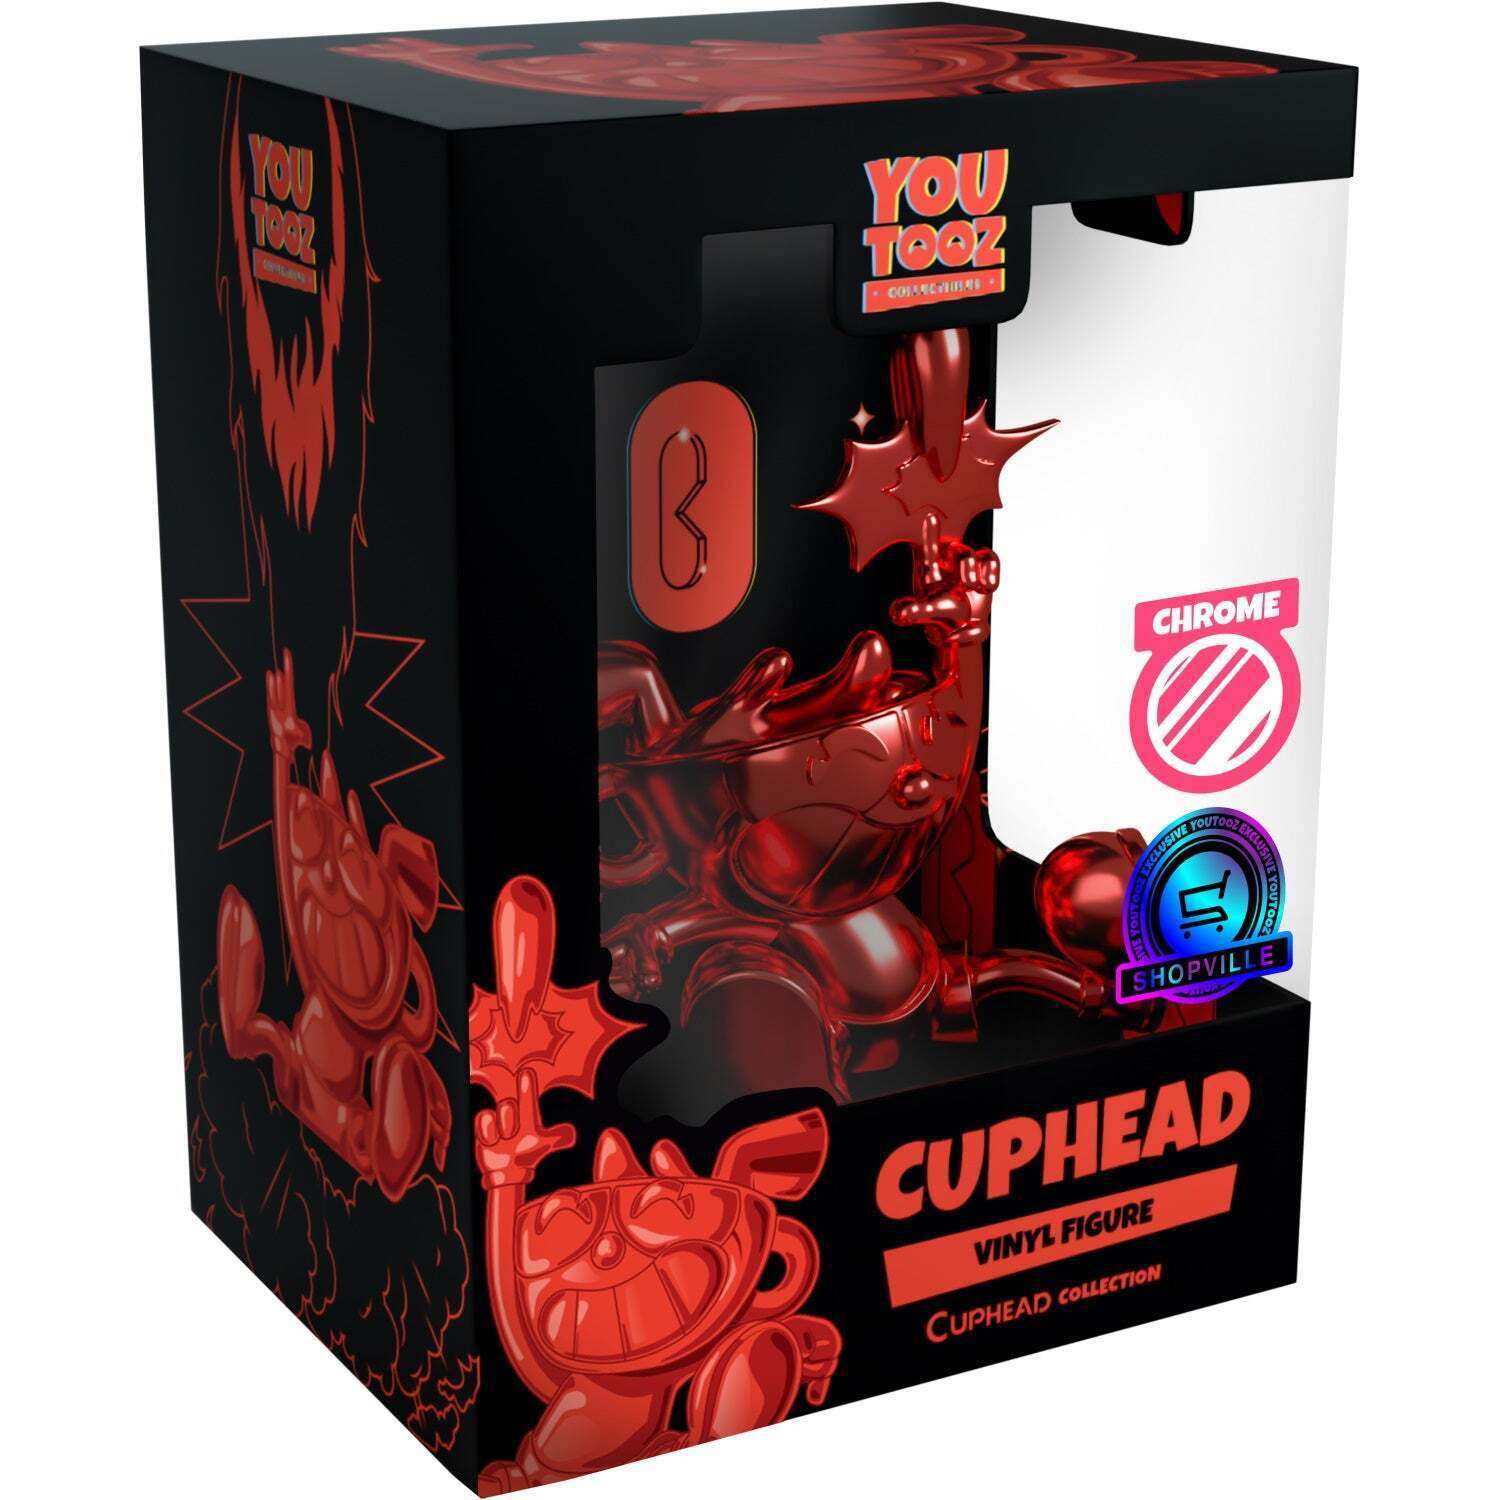 Youtooz x Shopville: Cuphead Collection - Red Chrome Vinyl Figure 500 Made Only